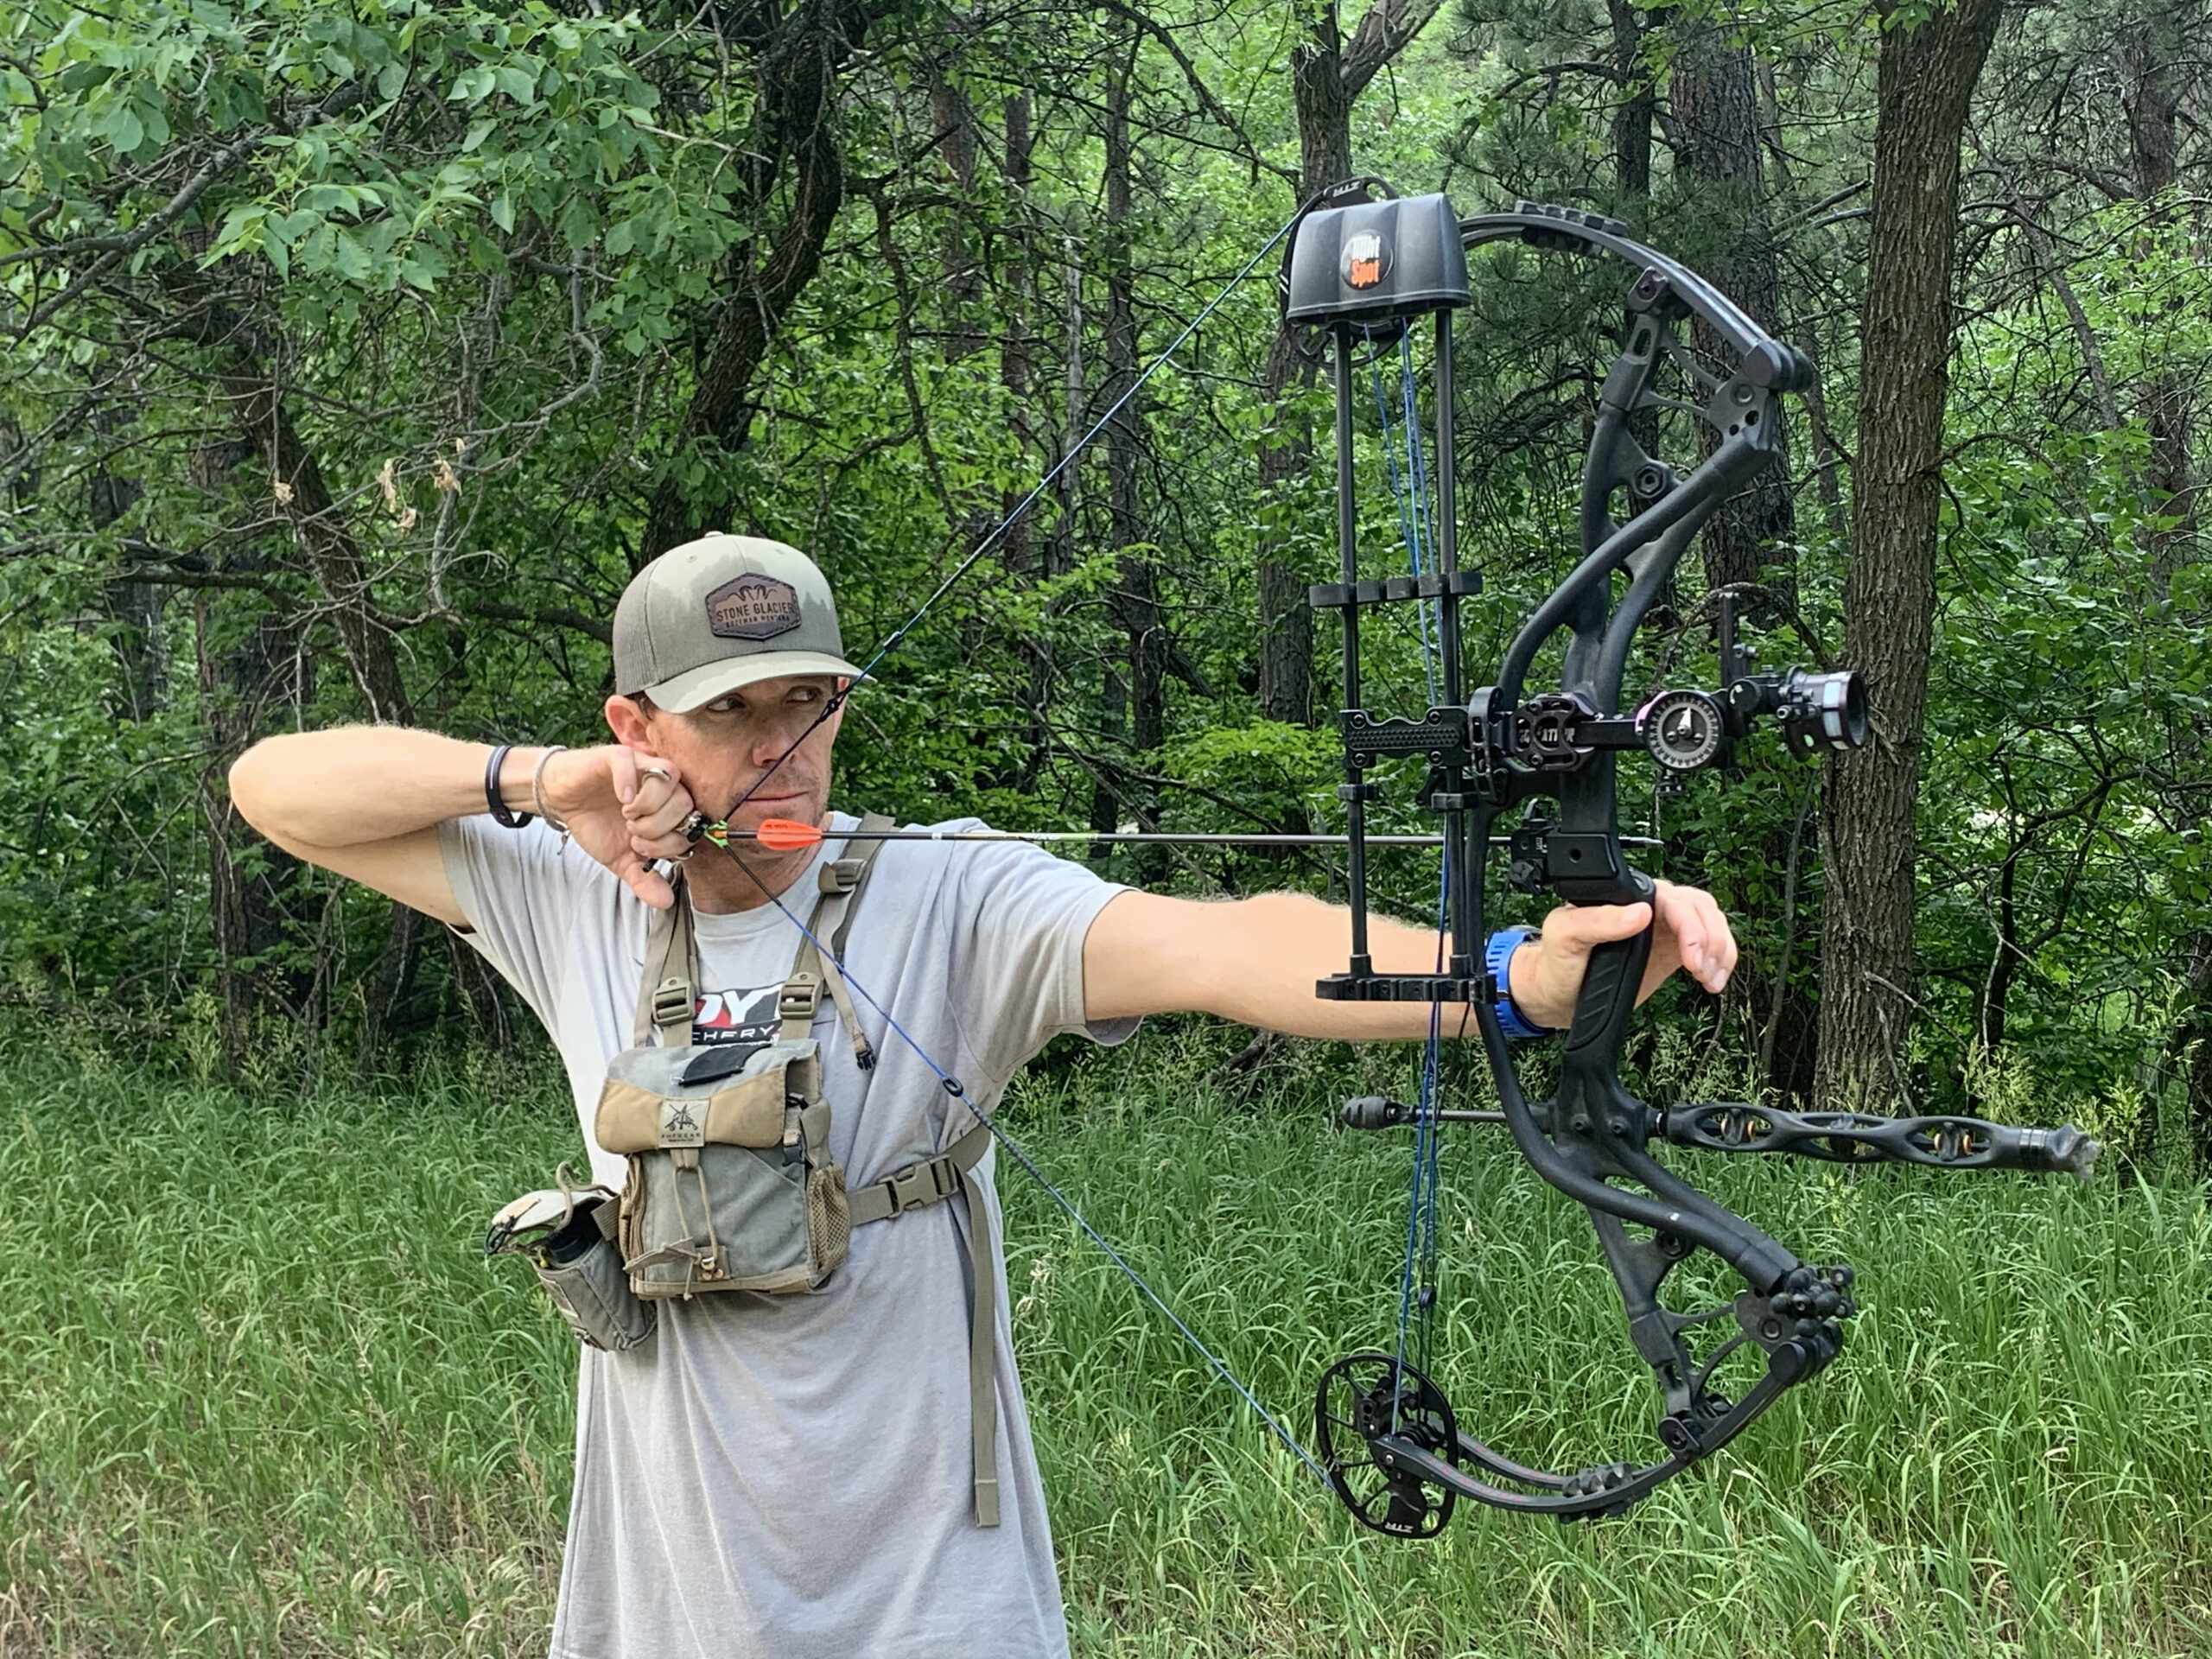 How to shoot a compound bow.